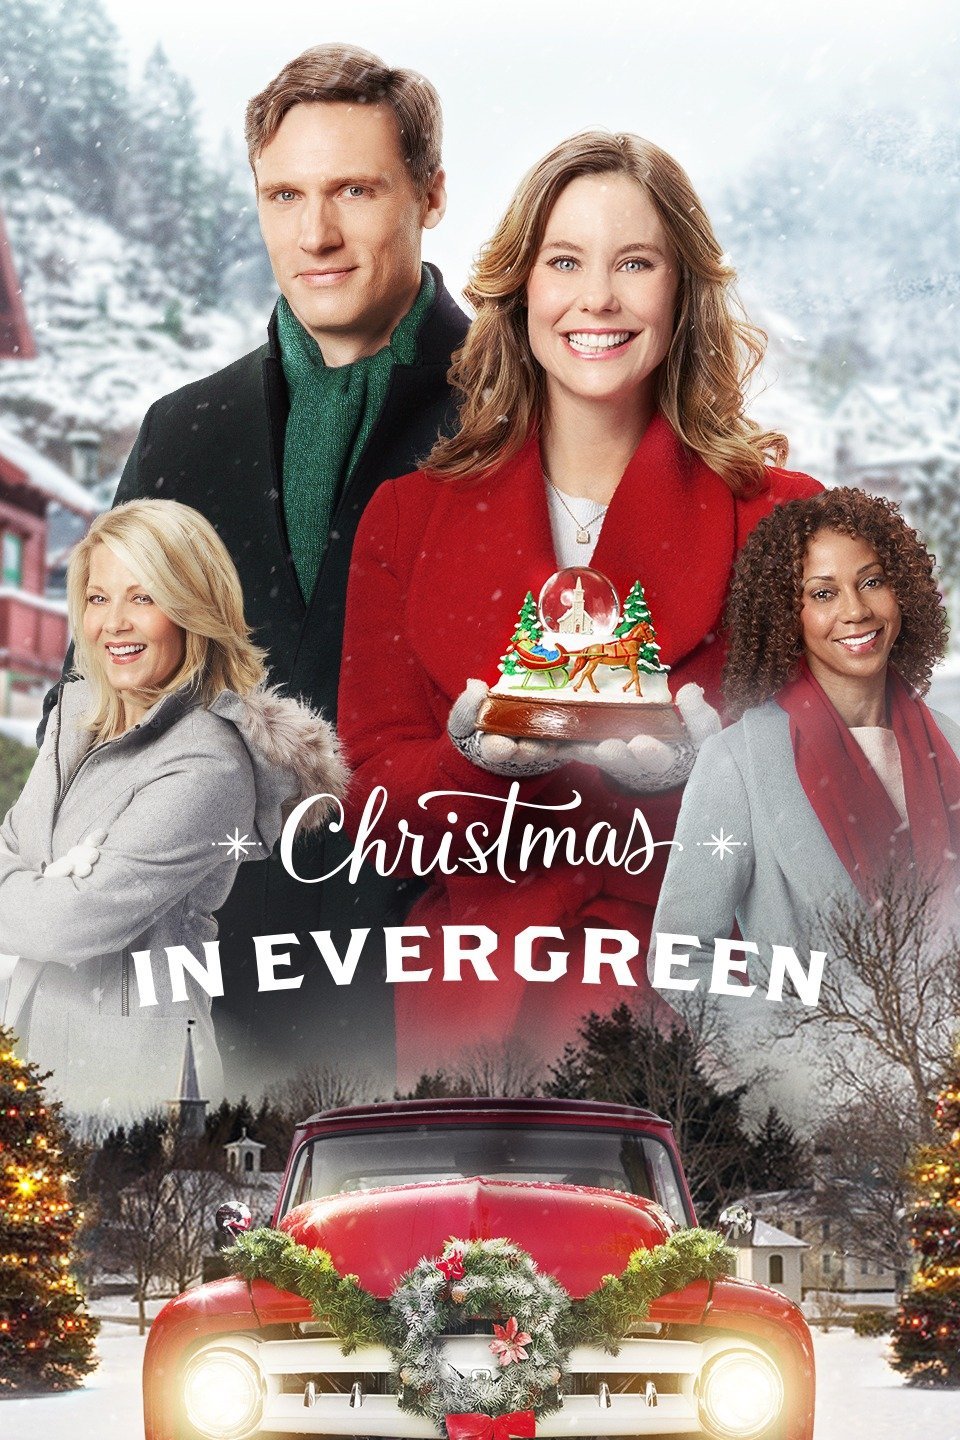 Poster of the movie Christmas in Evergreen